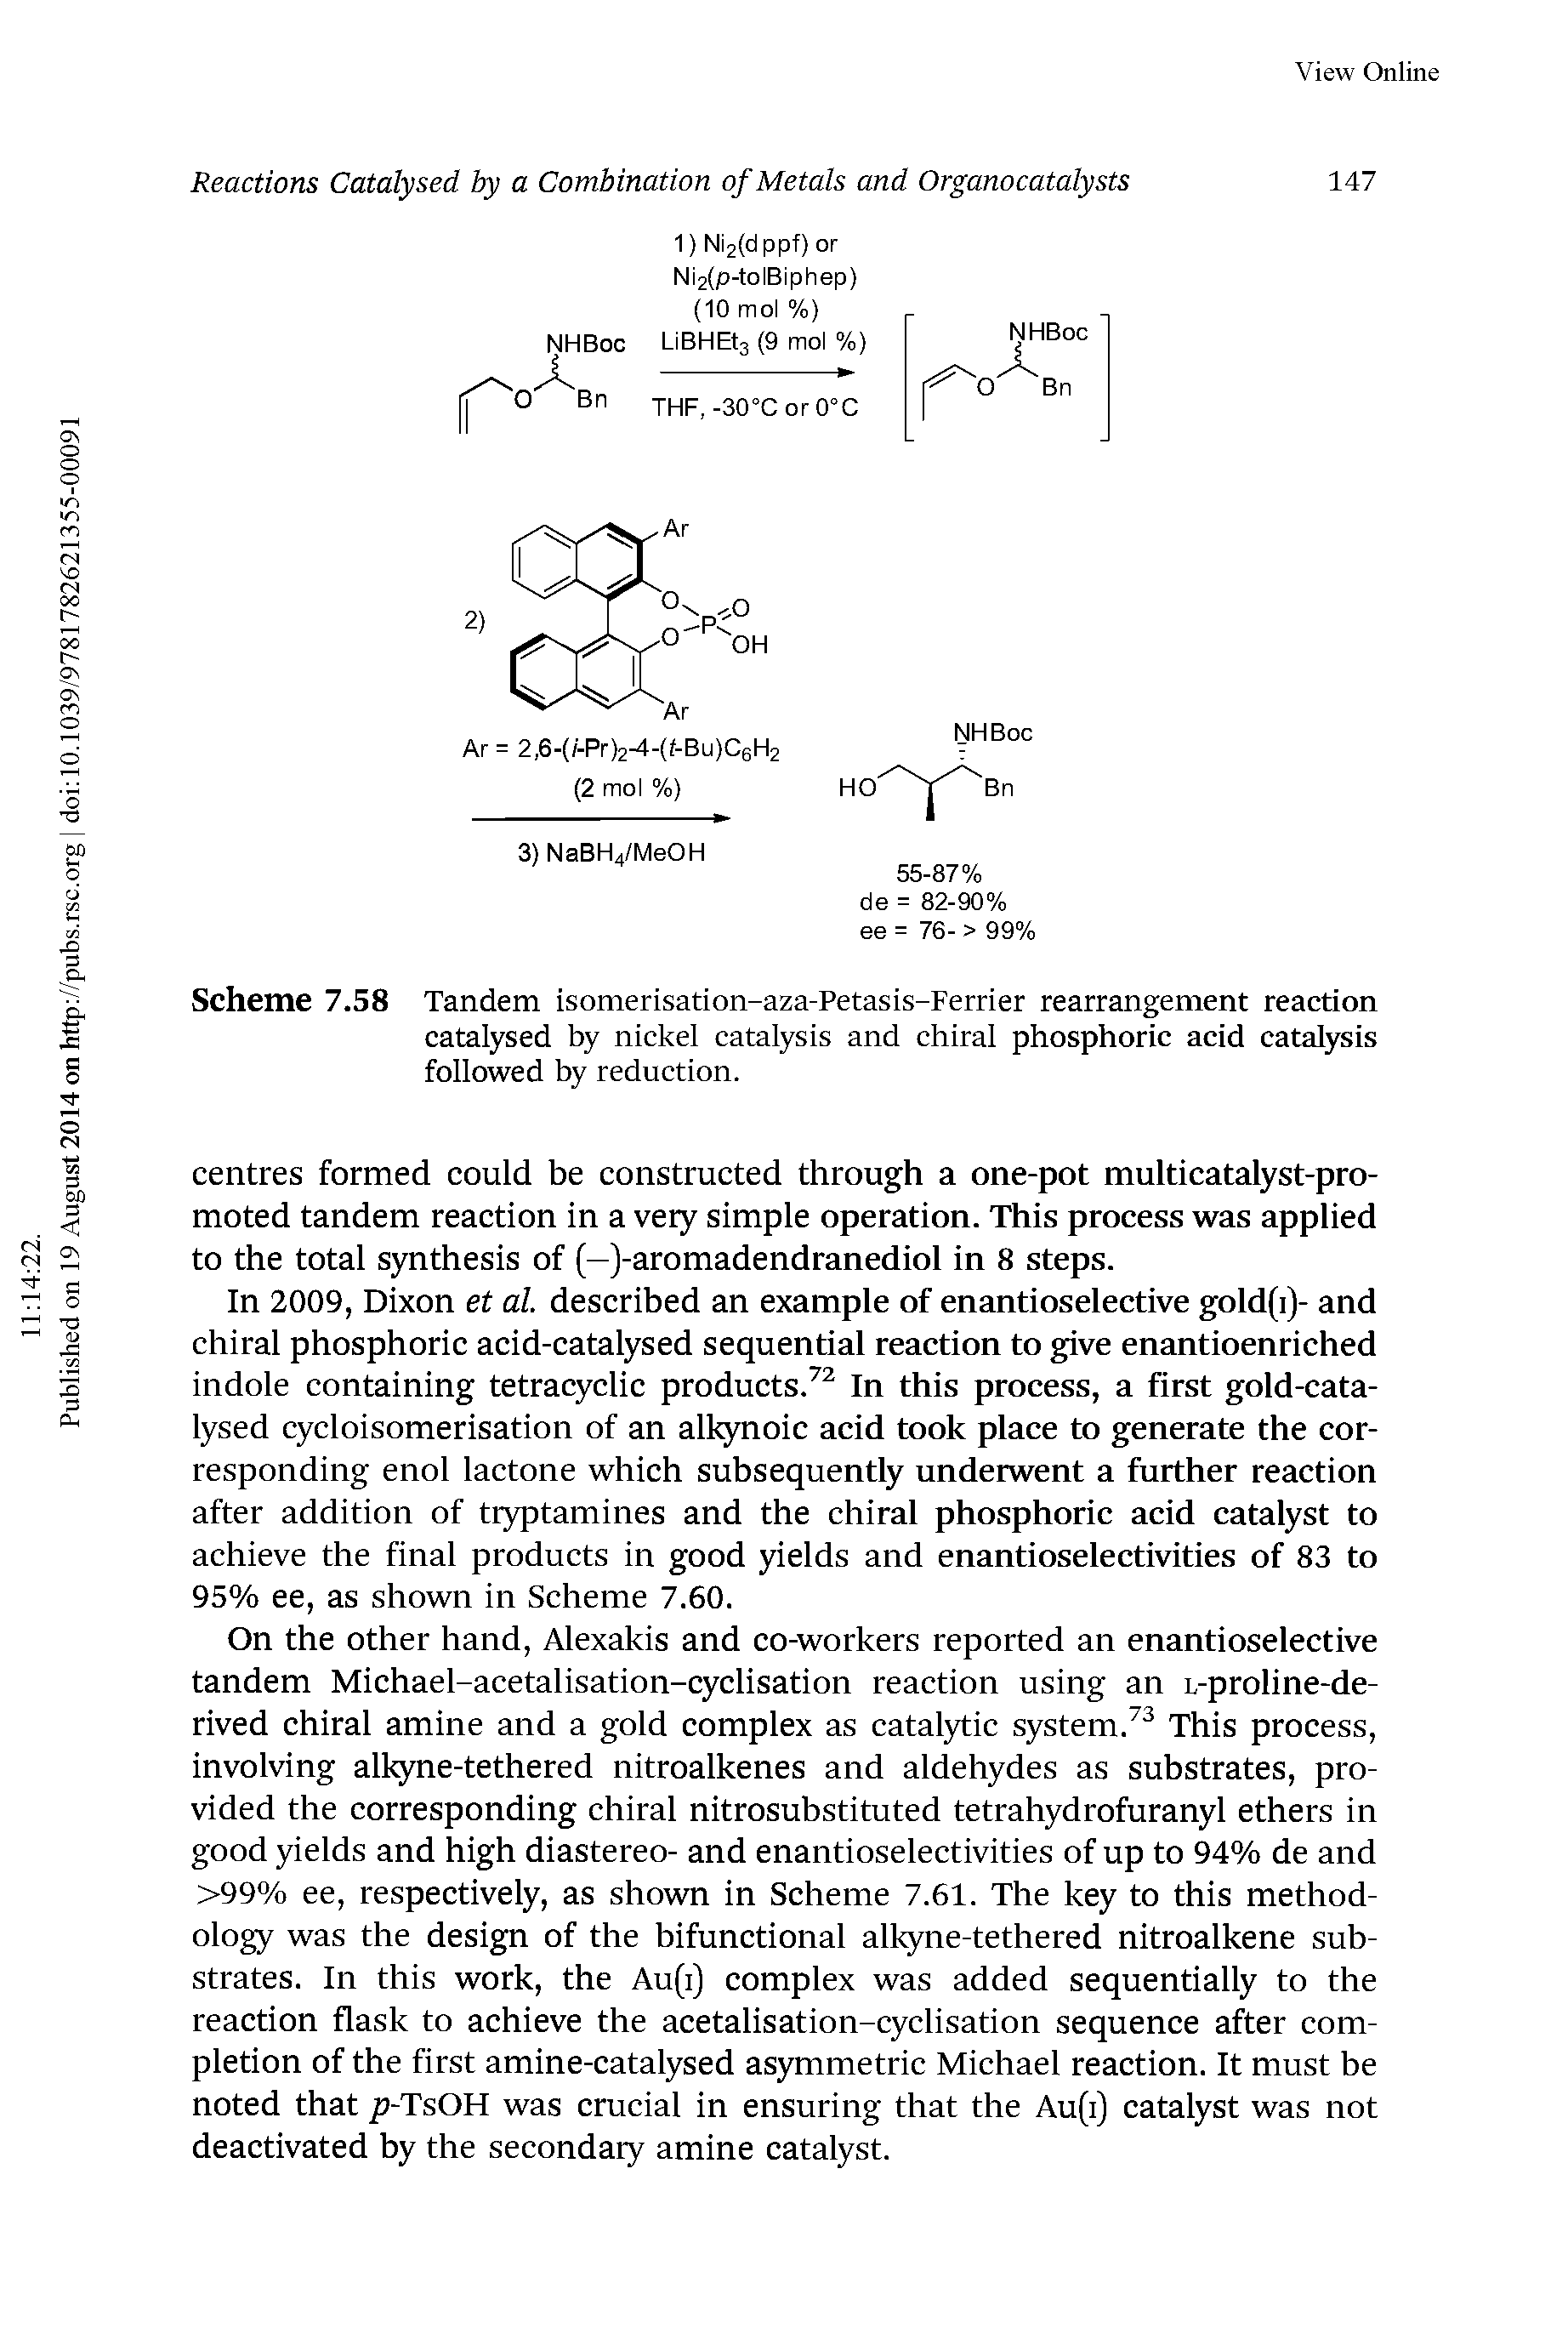 Scheme 7.58 Tandem isomerisation-aza-Petasis-Ferrier rearrangement reaction catalysed by nickel catalysis and chiral phosphoric acid catalysis followed by reduction.